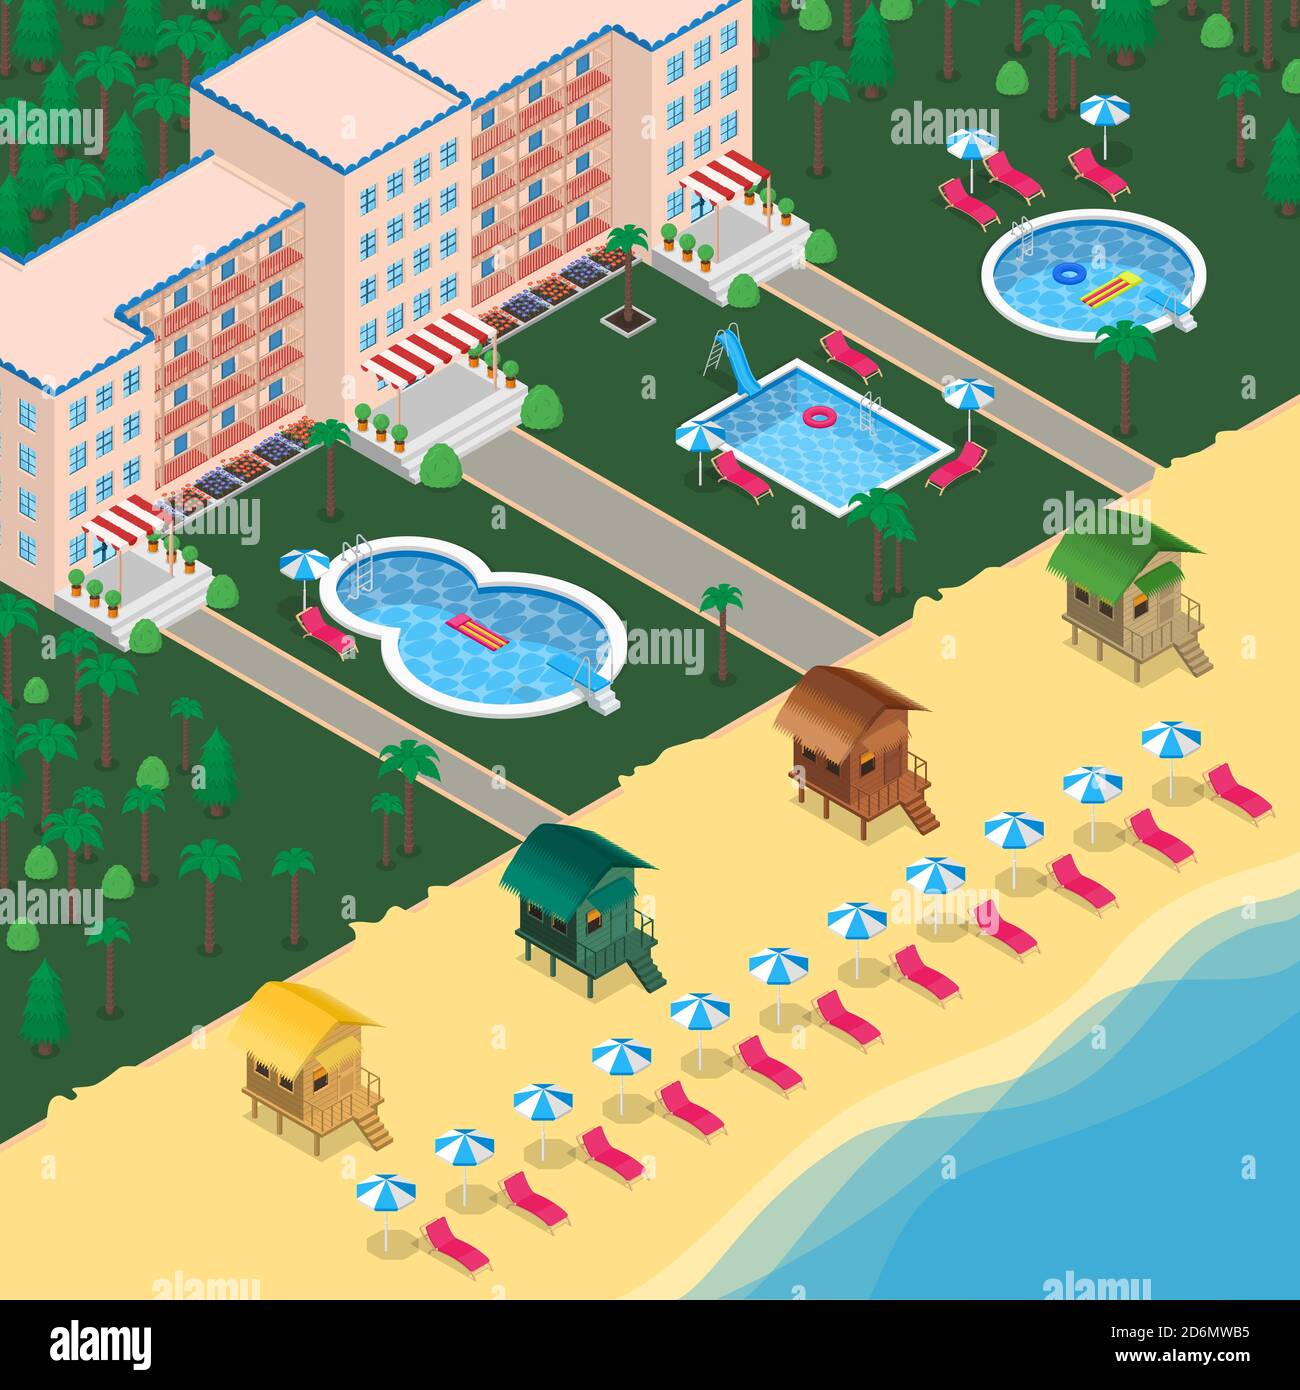 Hotel resort vector 3d isometric illustration. Modern buildings, swimming pool, tropical garden, bungalows on seaside. Summer vcation and holiday trav Stock Vector